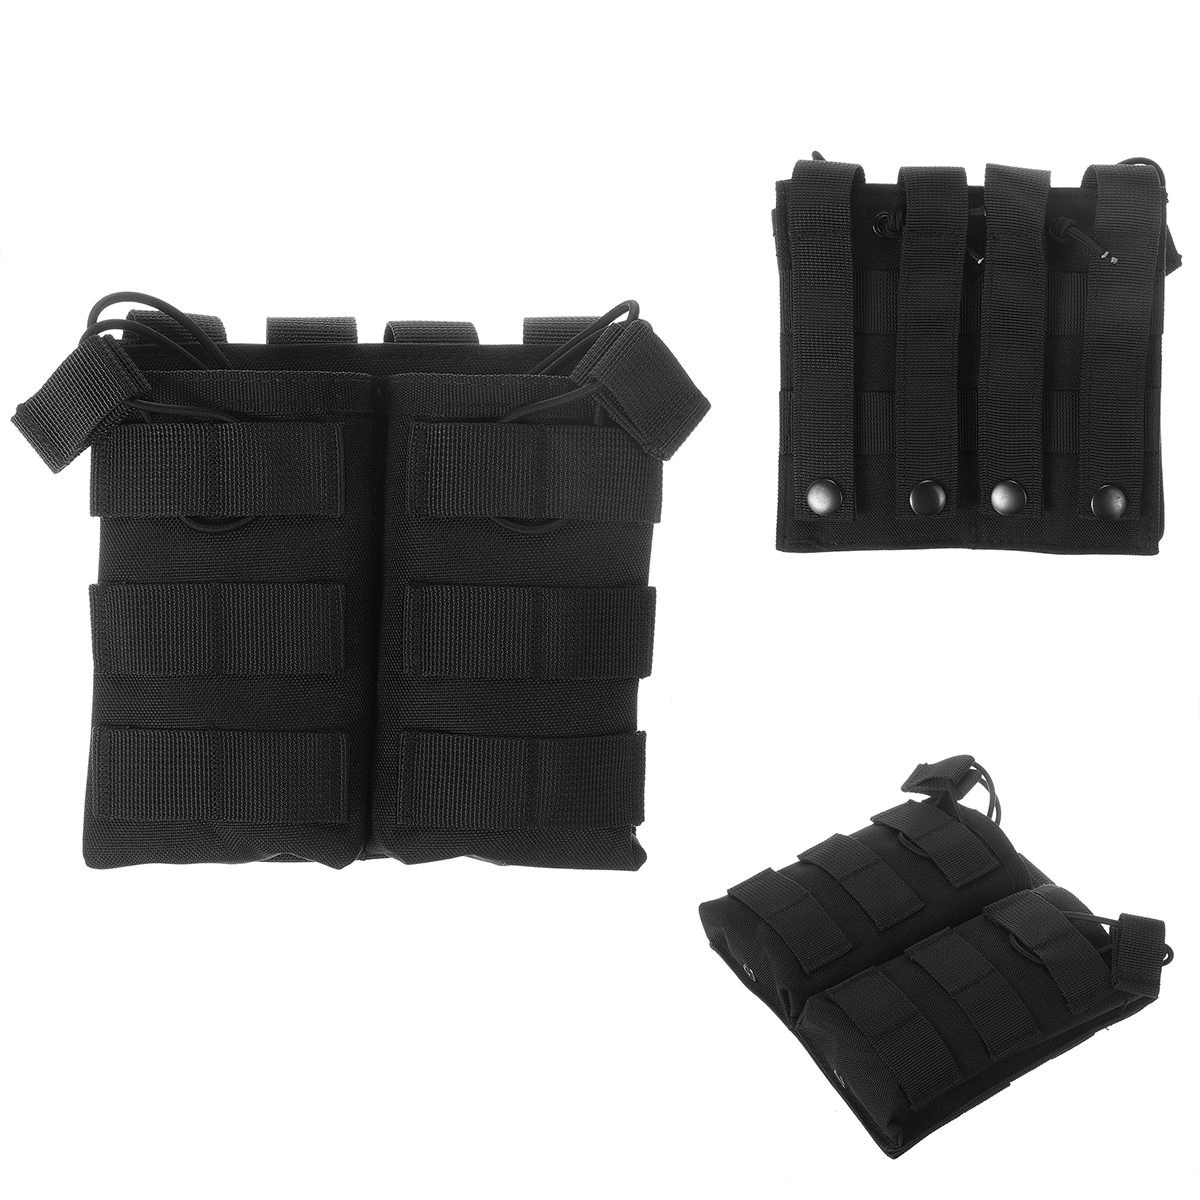 Tactical-M4-Magazine-Pouch-600D-Oxford-Double-MOLLEPALS-Fast-Mag-Pouches-For-Outdoor-Hiking-Hunting--1779790-8